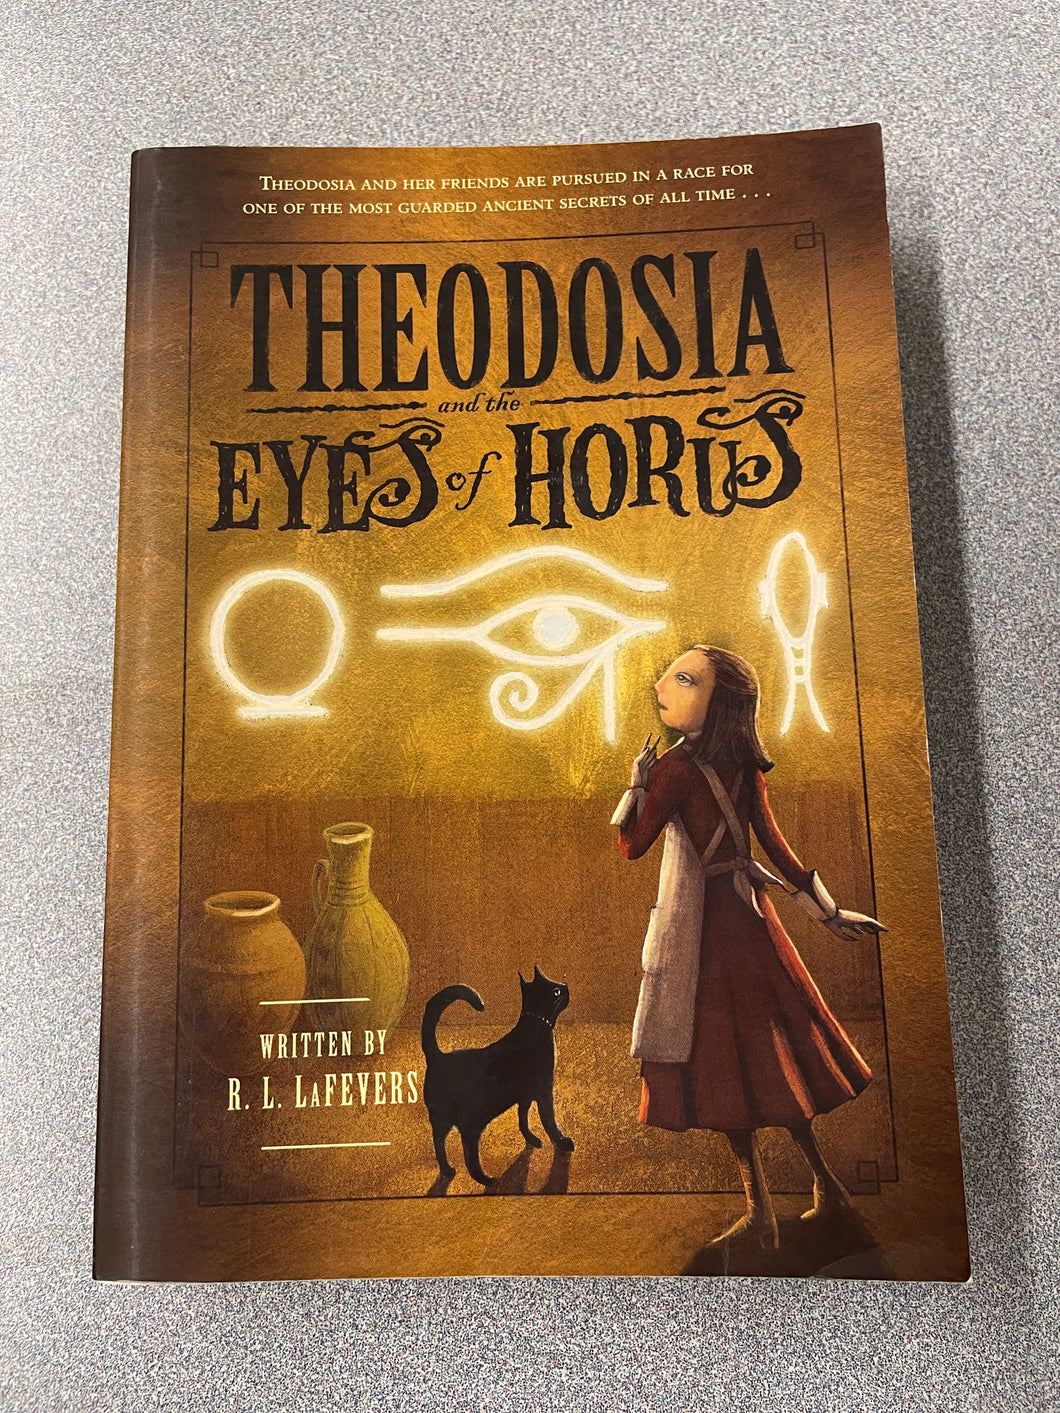 LaFevers, R. L., Theodosia and the Eyes of Horus [2010] YF 12/23